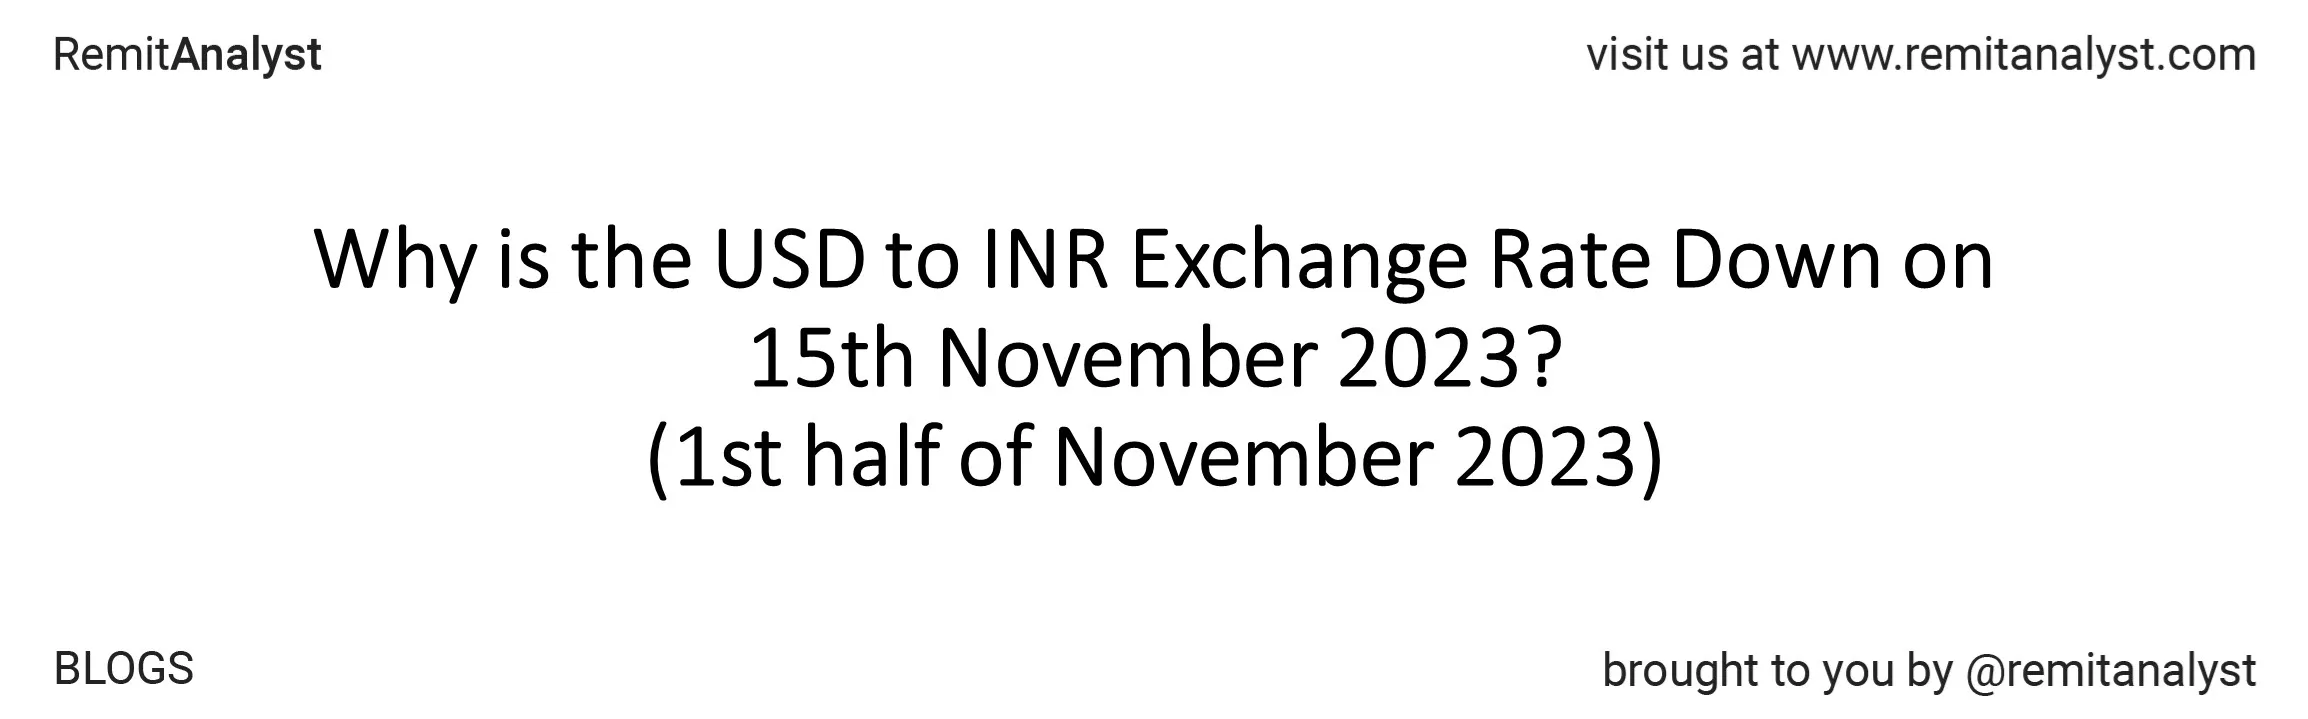 usd-to-inr-exchange-rate-1-nov-2023-to-15-nov-2023-title